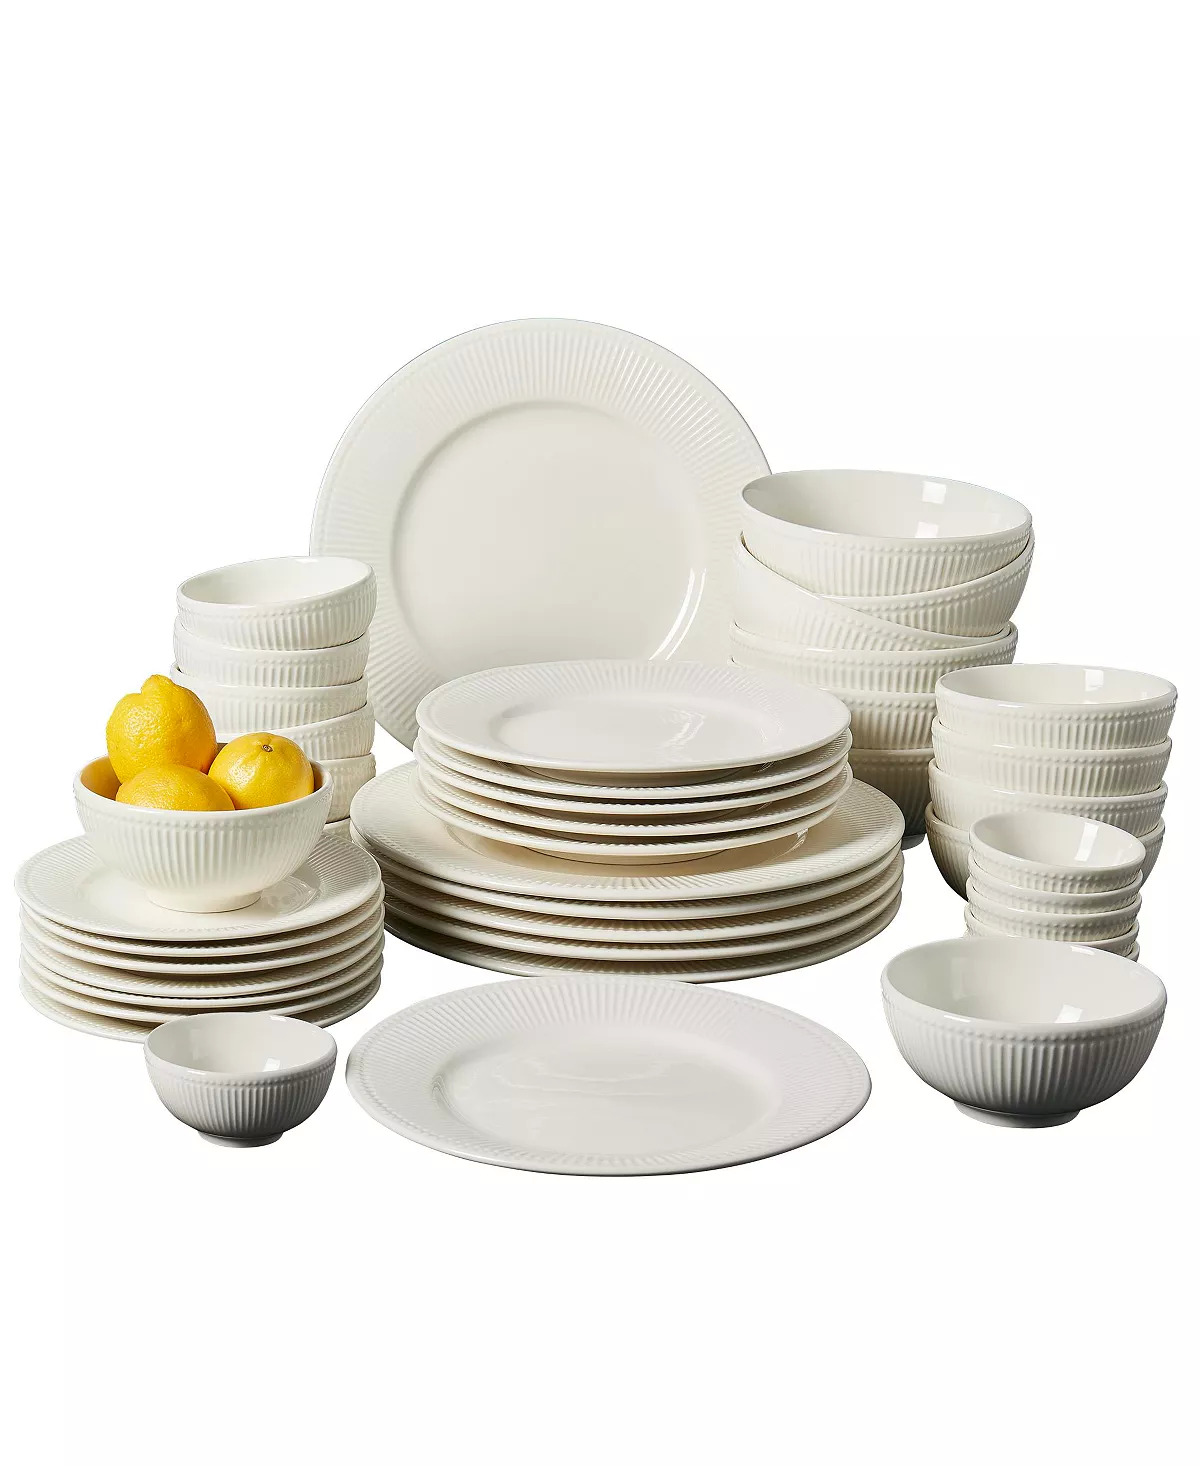 42-Piece Tabletops Unlimited Dinnerware Set (Various Designs, Service for 6) Inspiration by Denmark Amelia $39.99 & More + Free Shipping